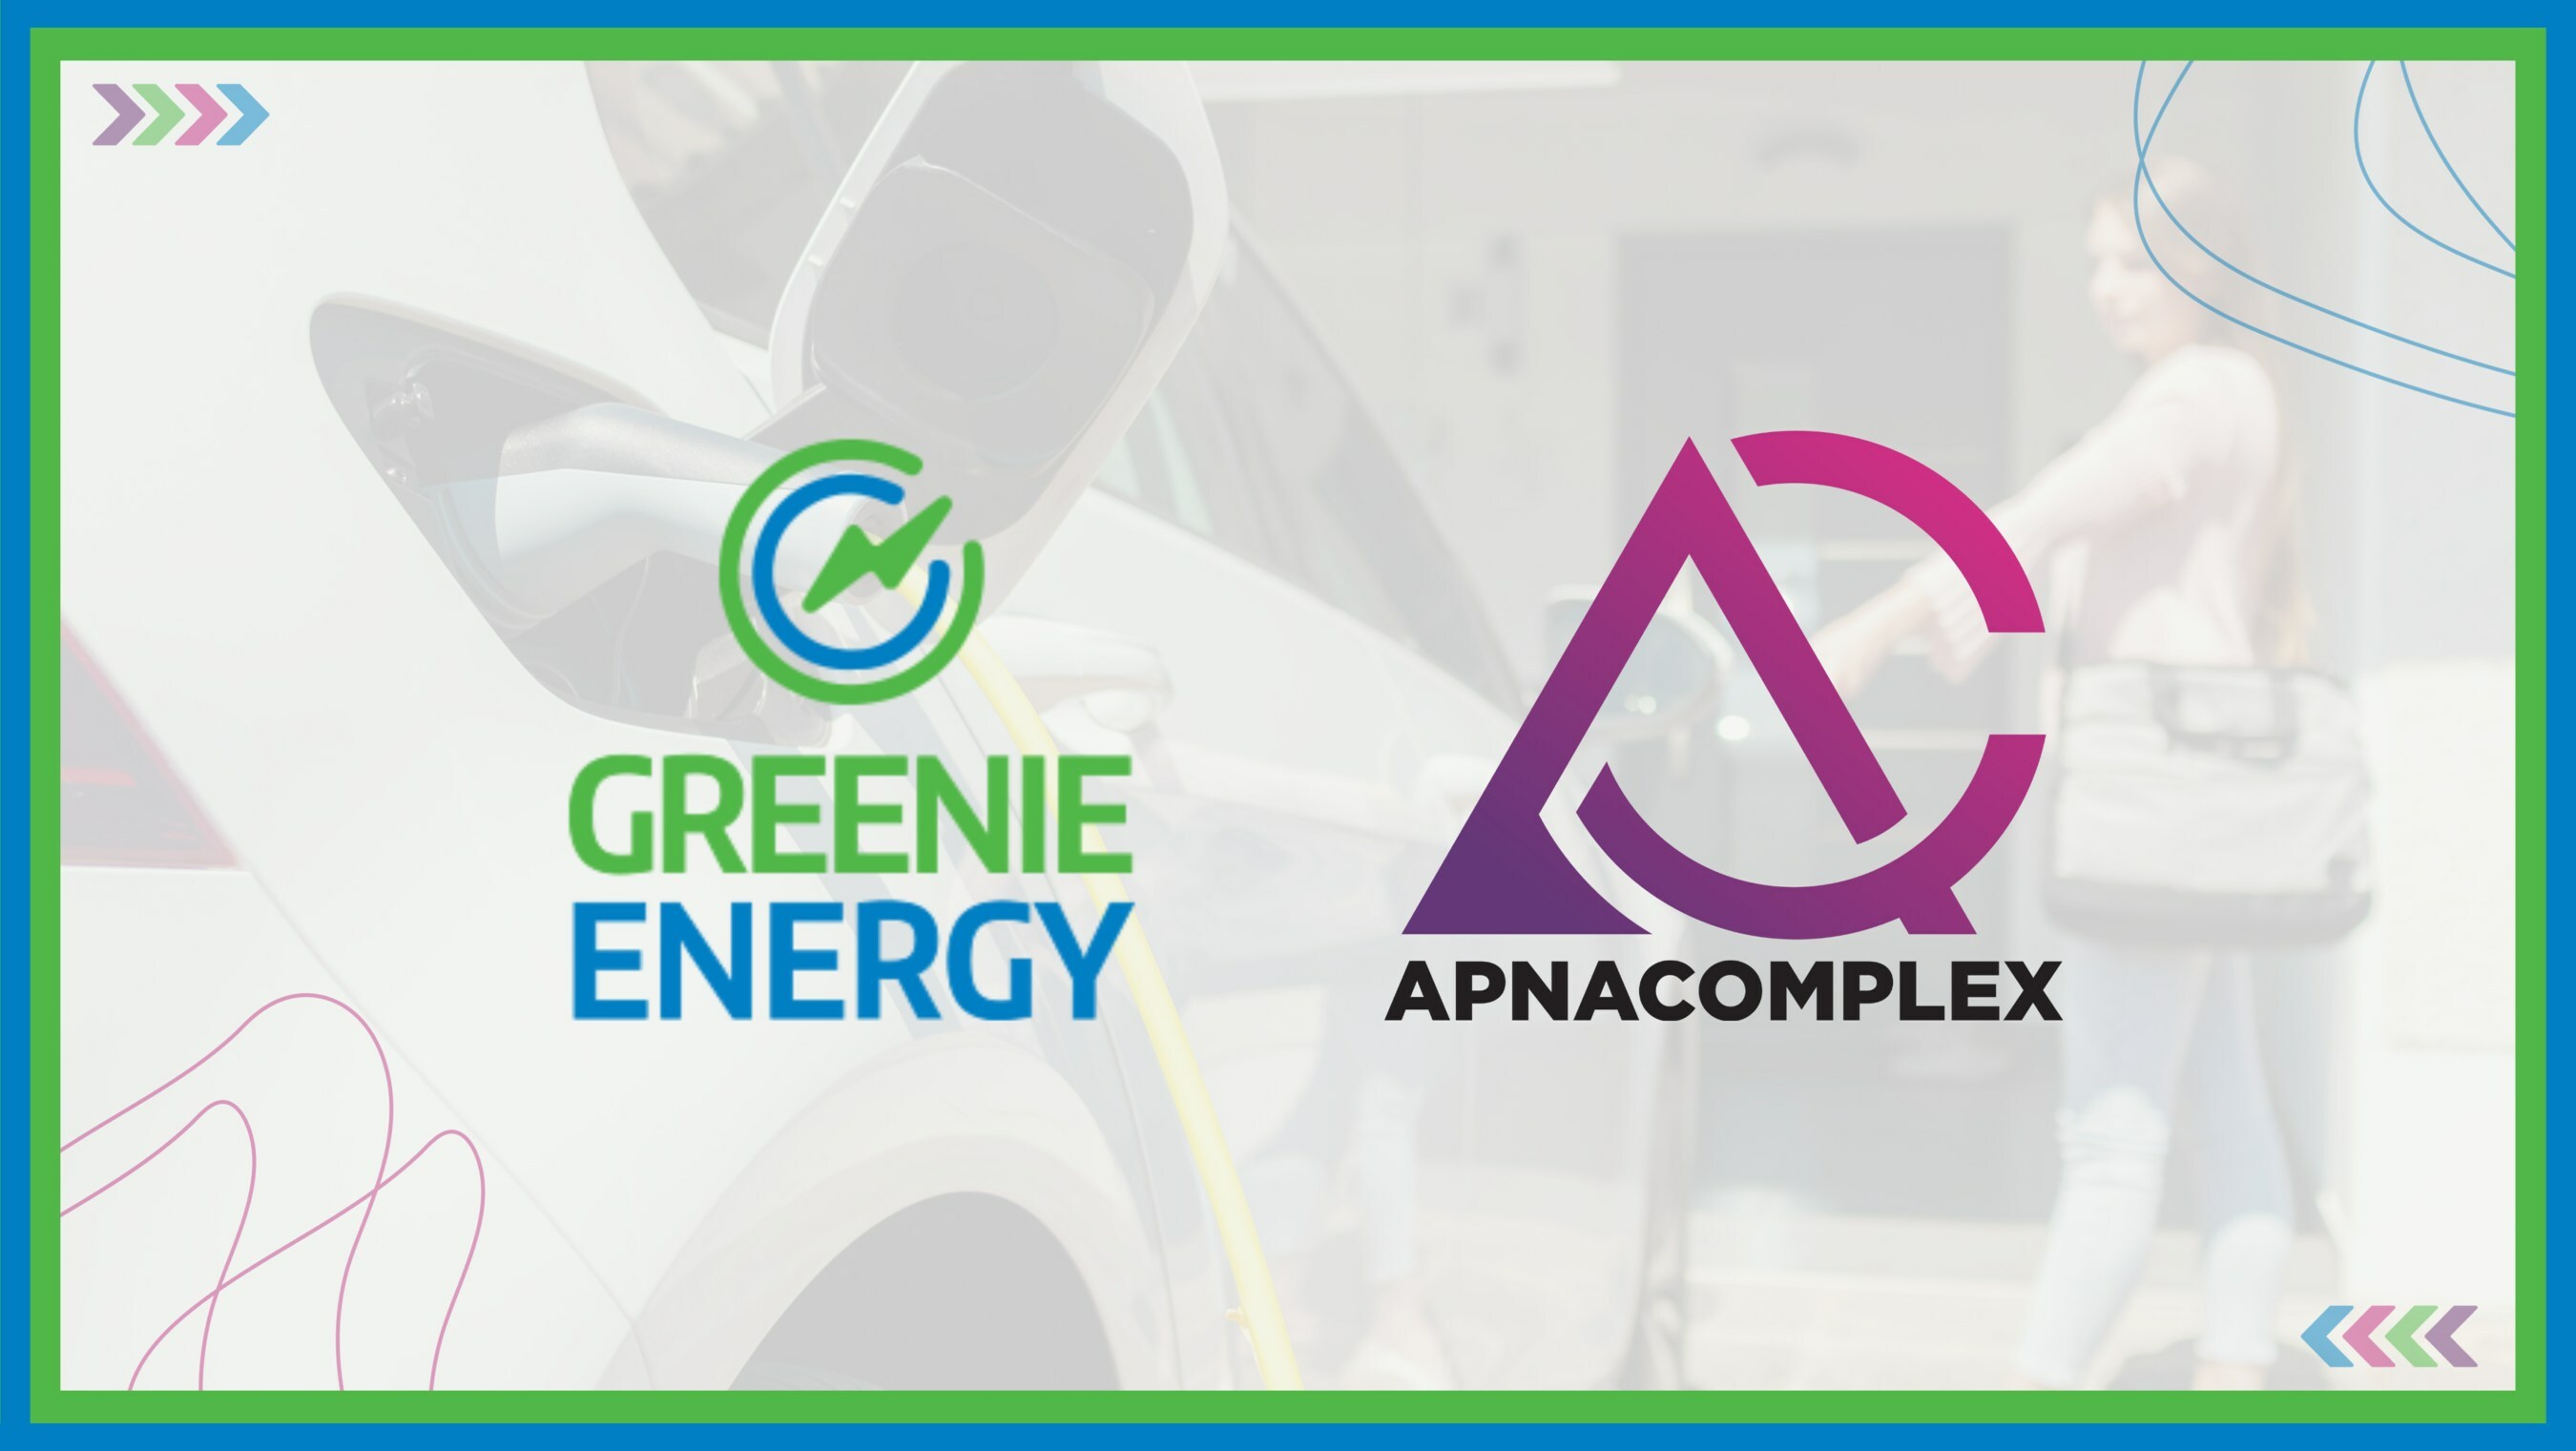 ApnaComplex and Greenie Energy have joined forces to drive EV adoption in Gated Communities in India. Graphic: Greenie Energy